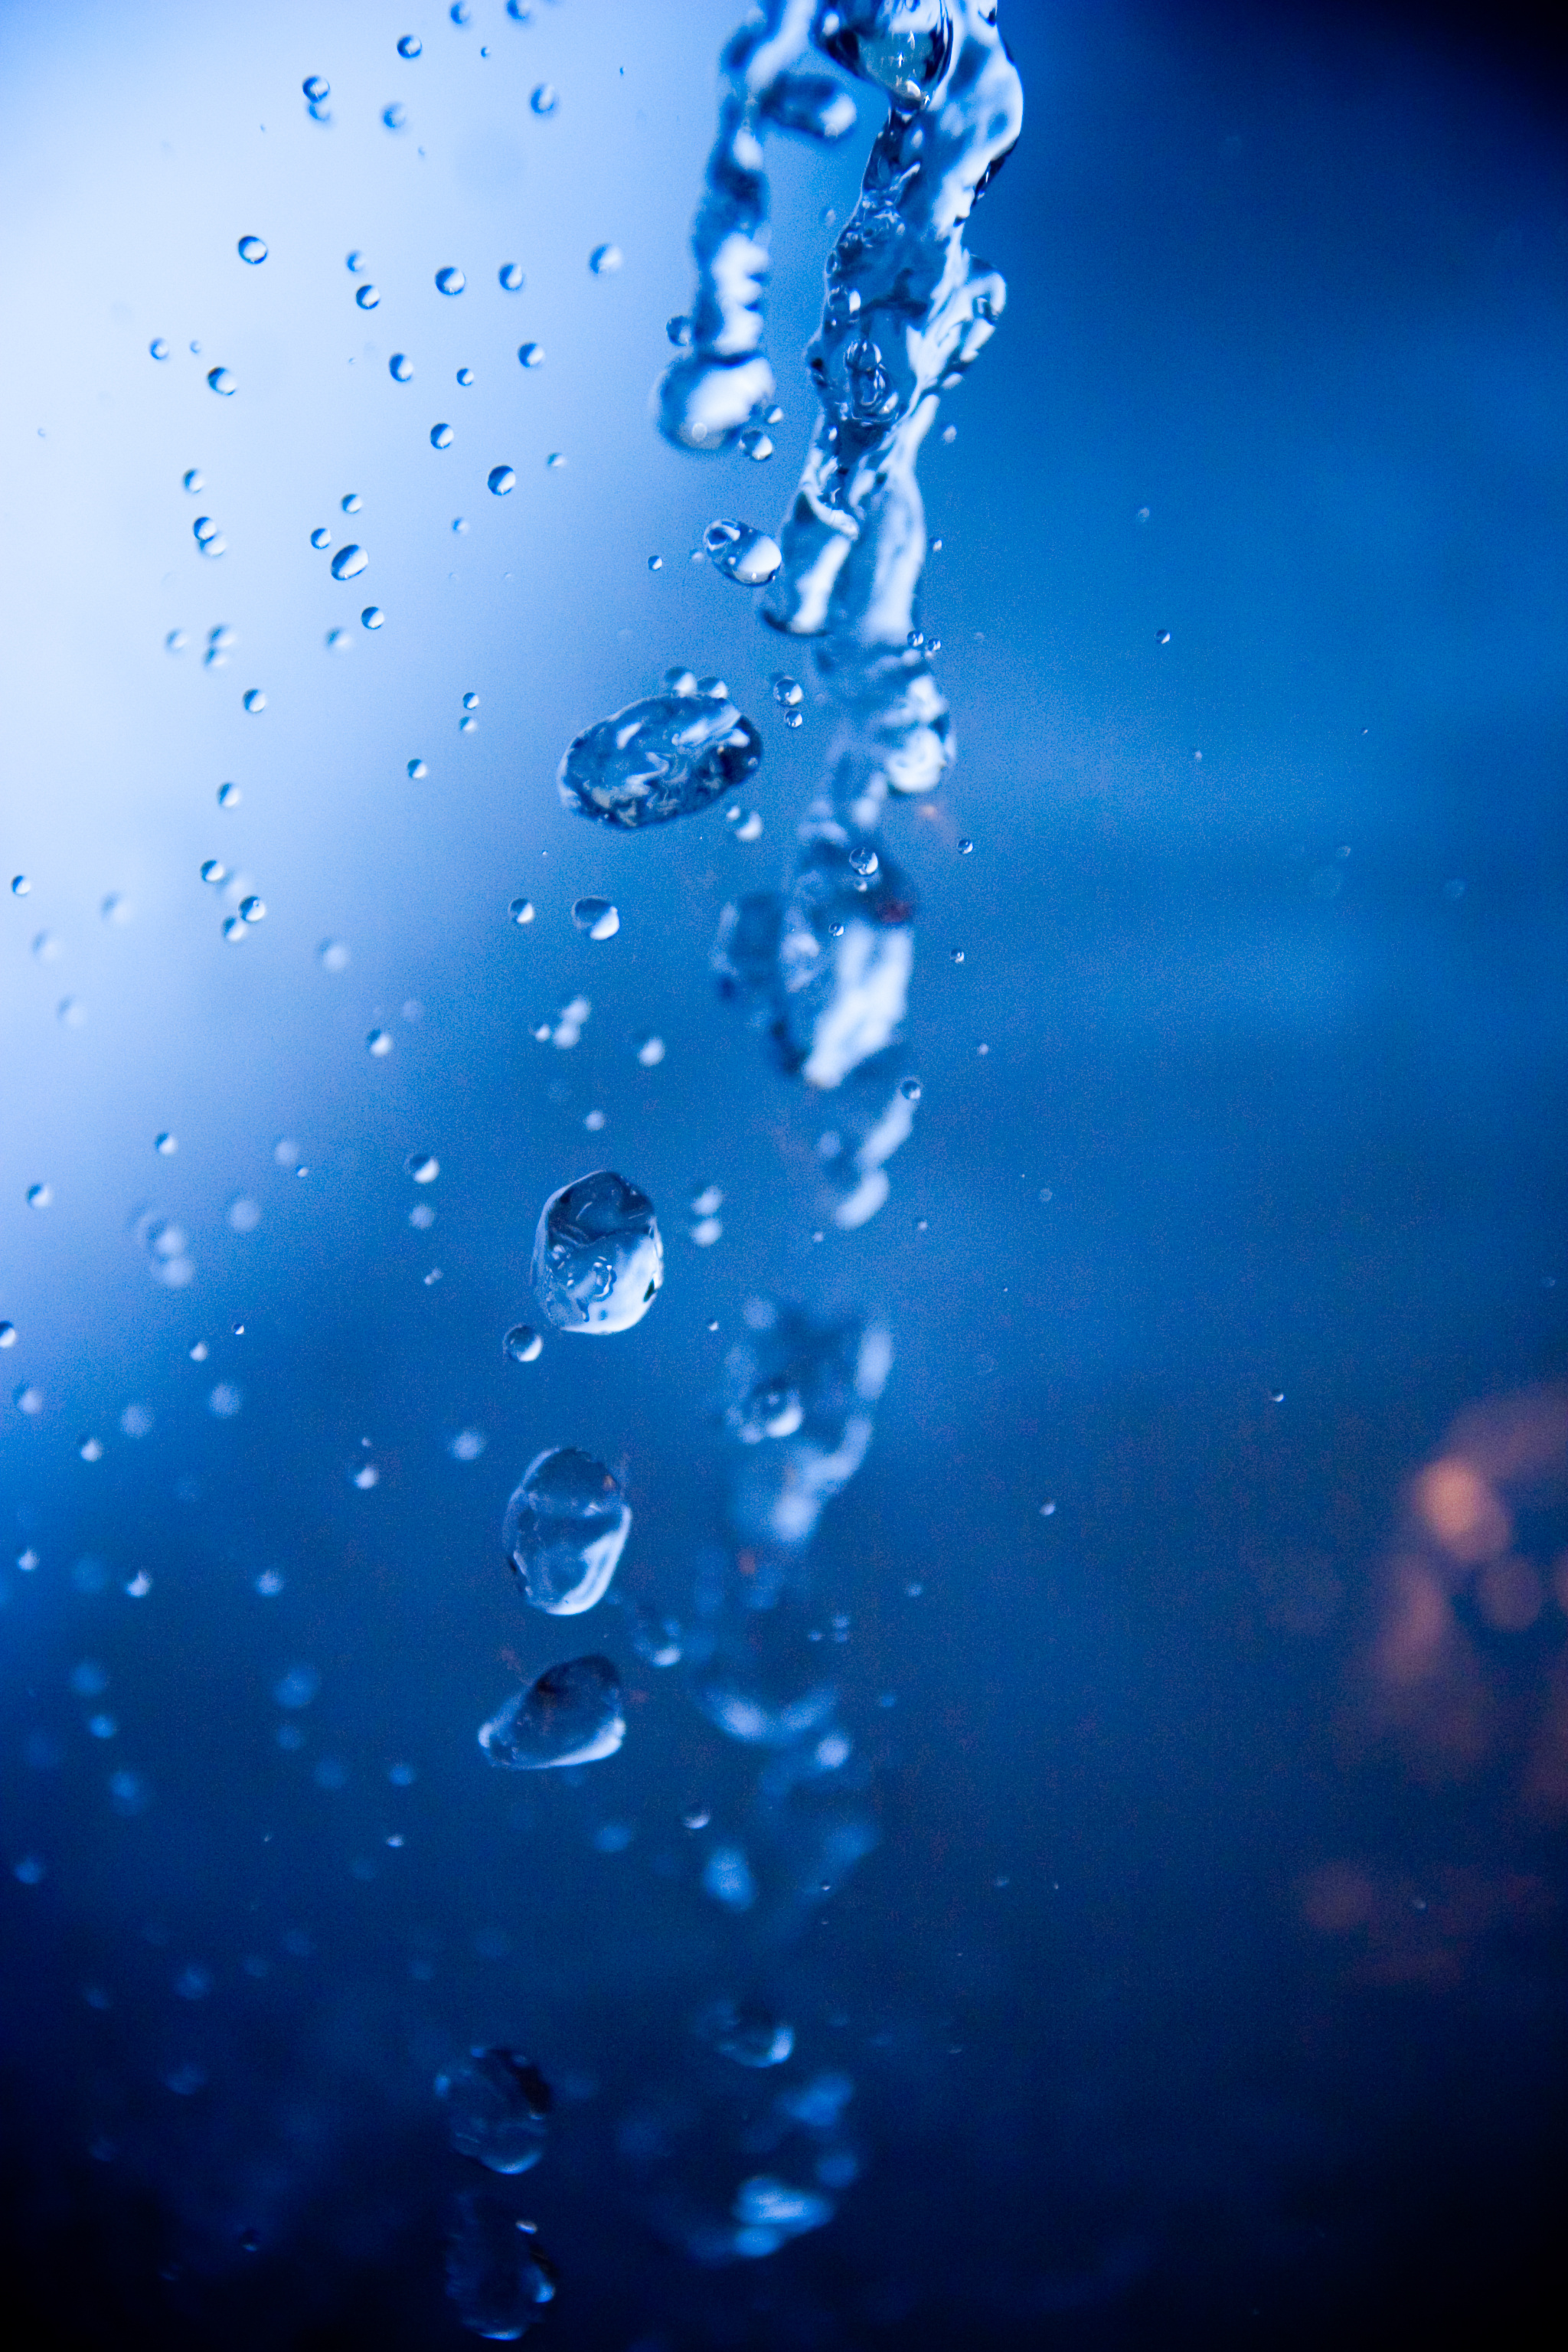 Water flow rate of emergency safety showers affects decontamination ...